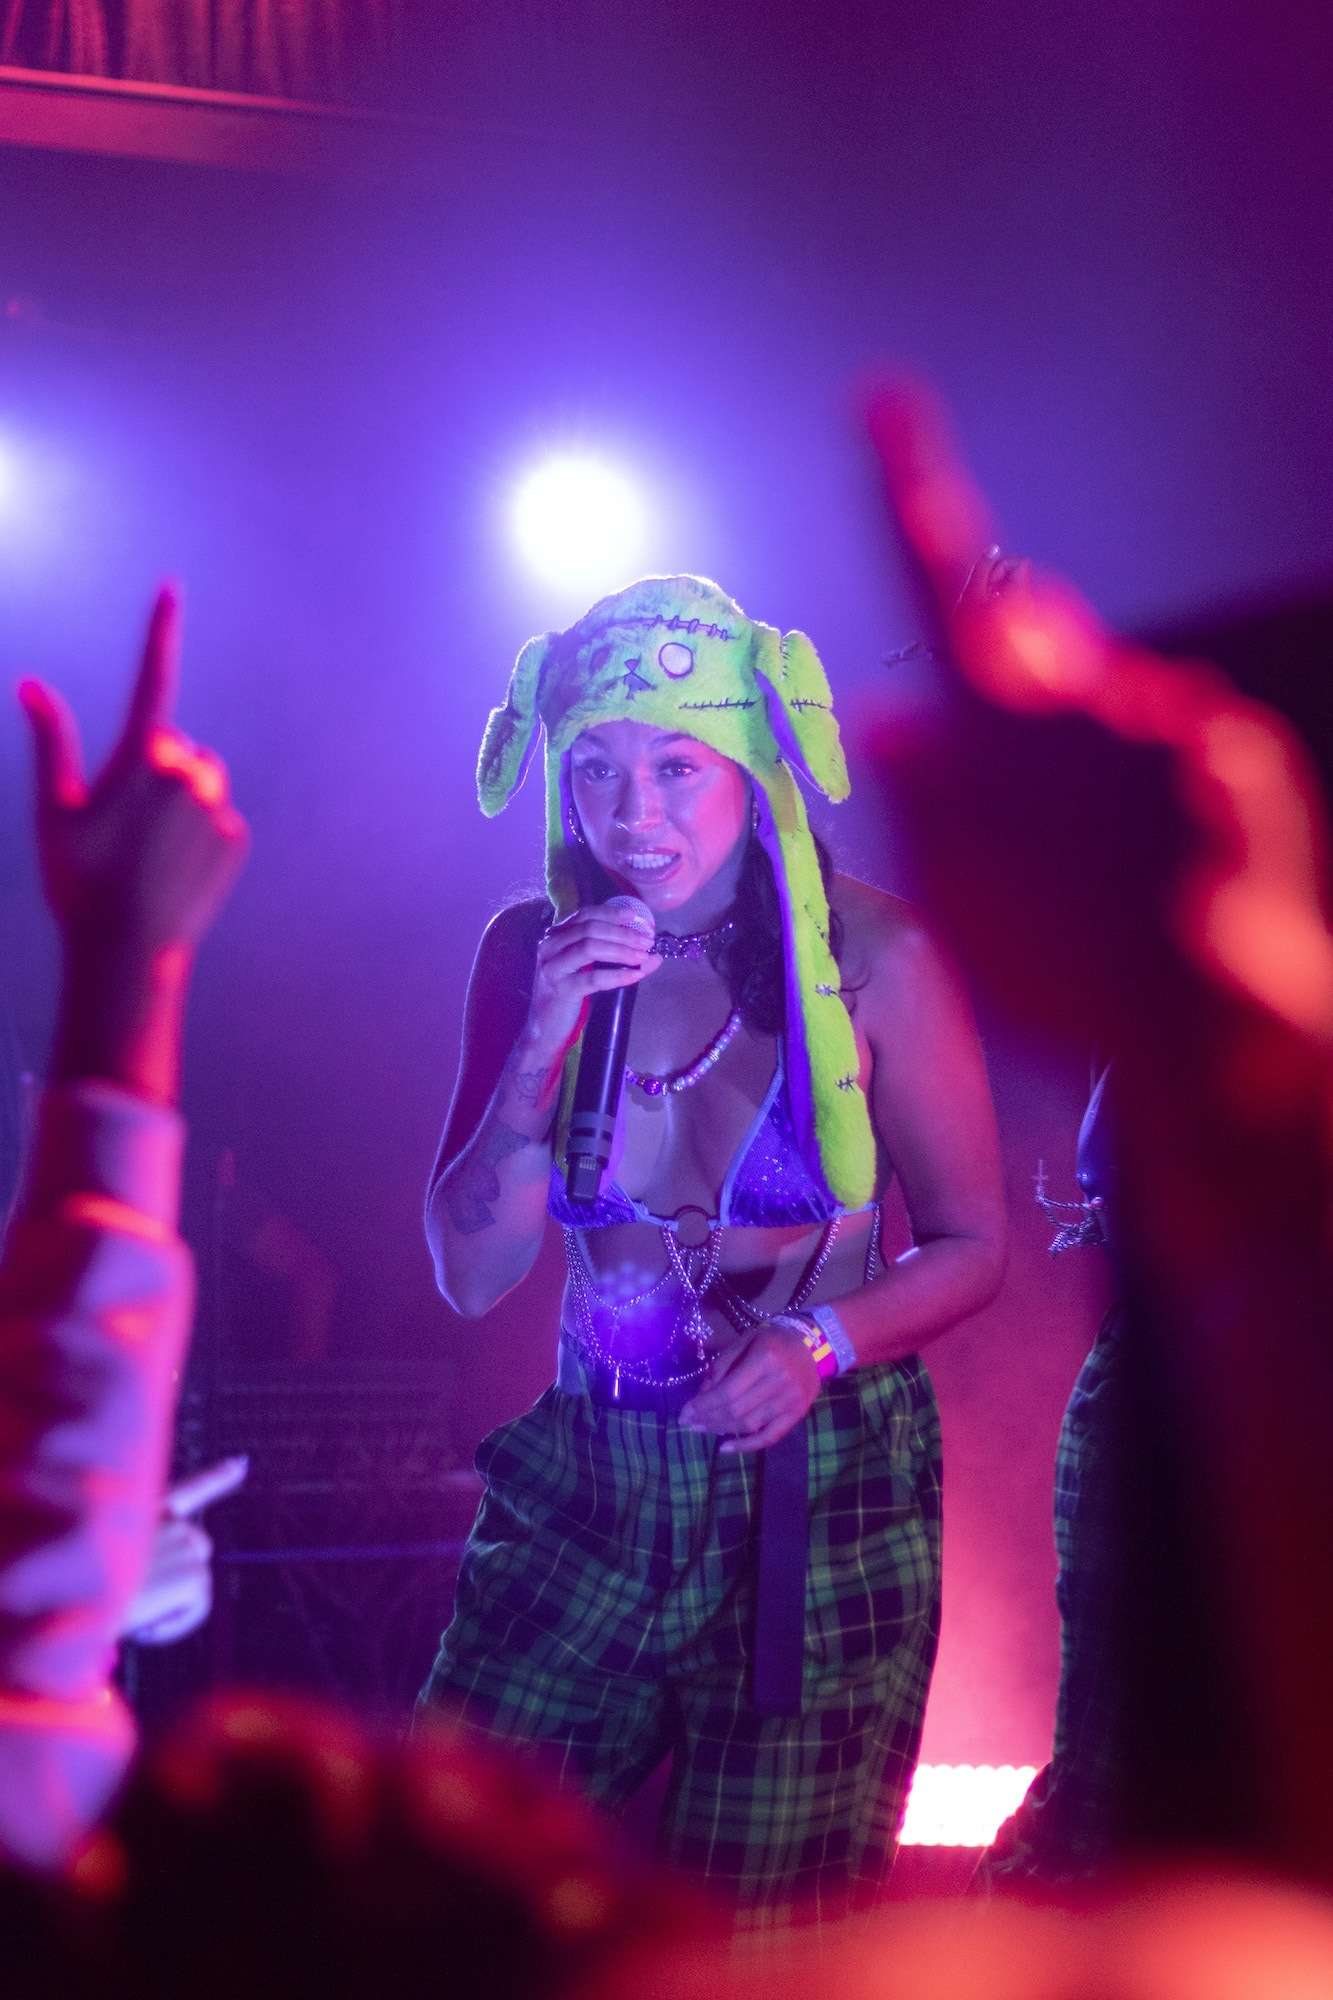 Princess Nokia - Official Lollapalooza Aftershow - Lincoln Hall - Chicago, IL - 08/01/2021 - Photo © 2021 by: Riley James